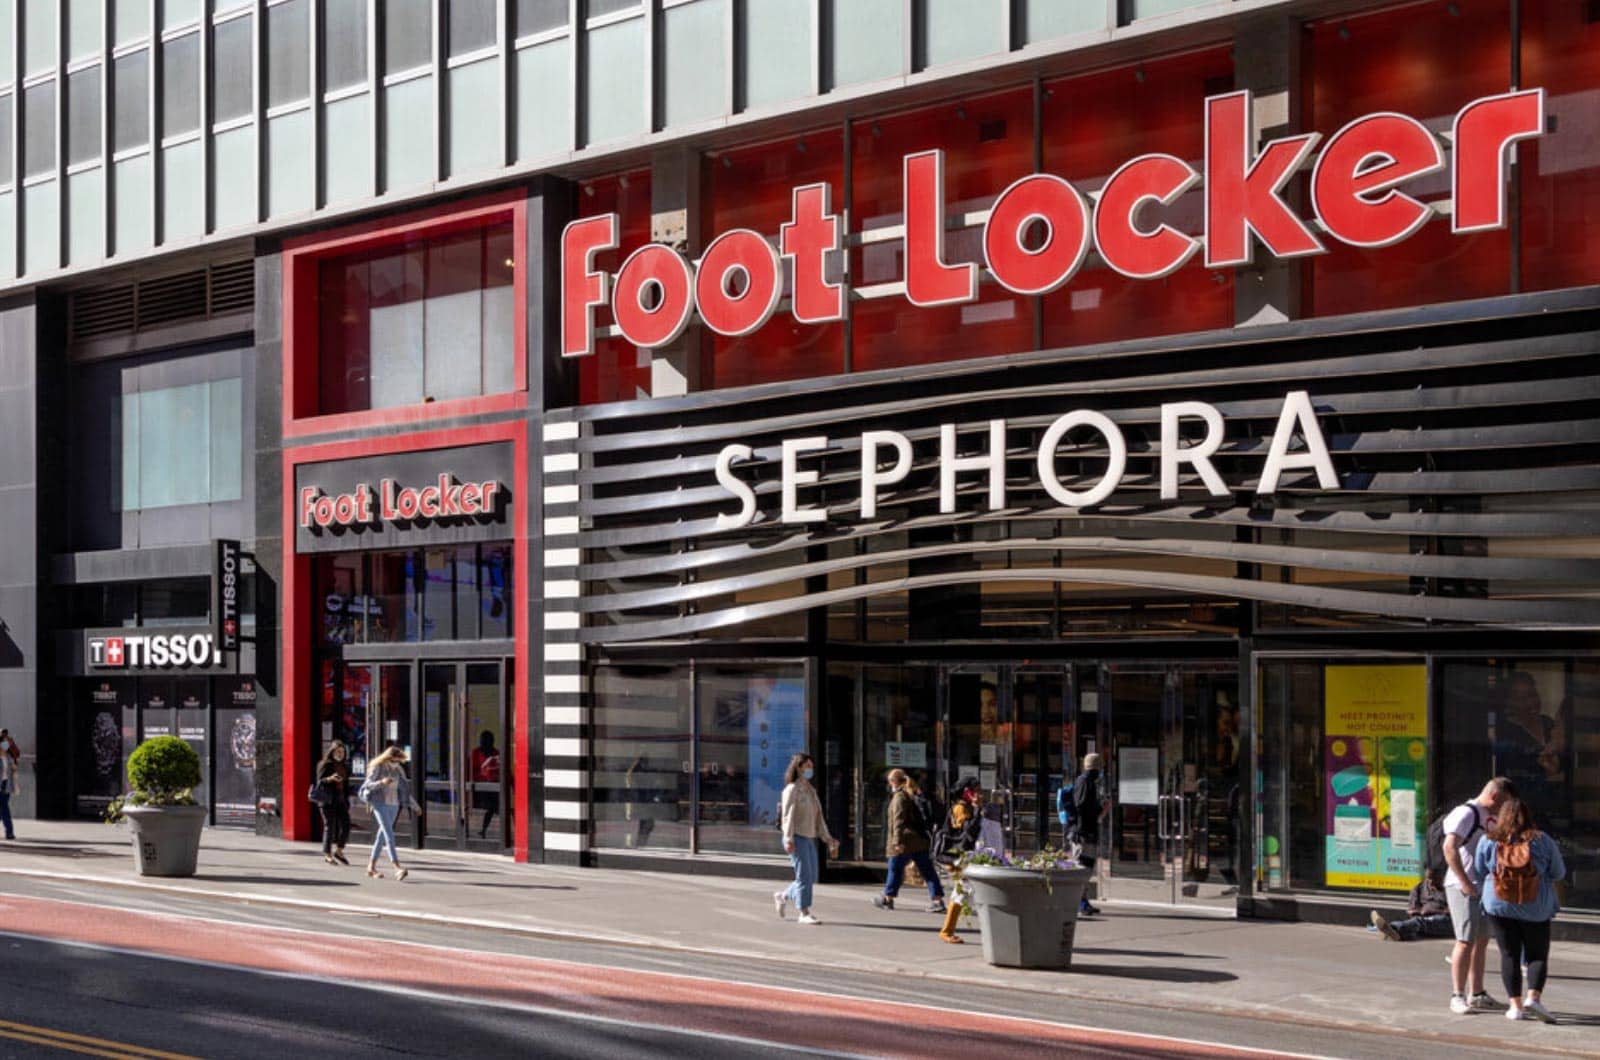 Storefront view of Foot Locker and Sephora in NYC